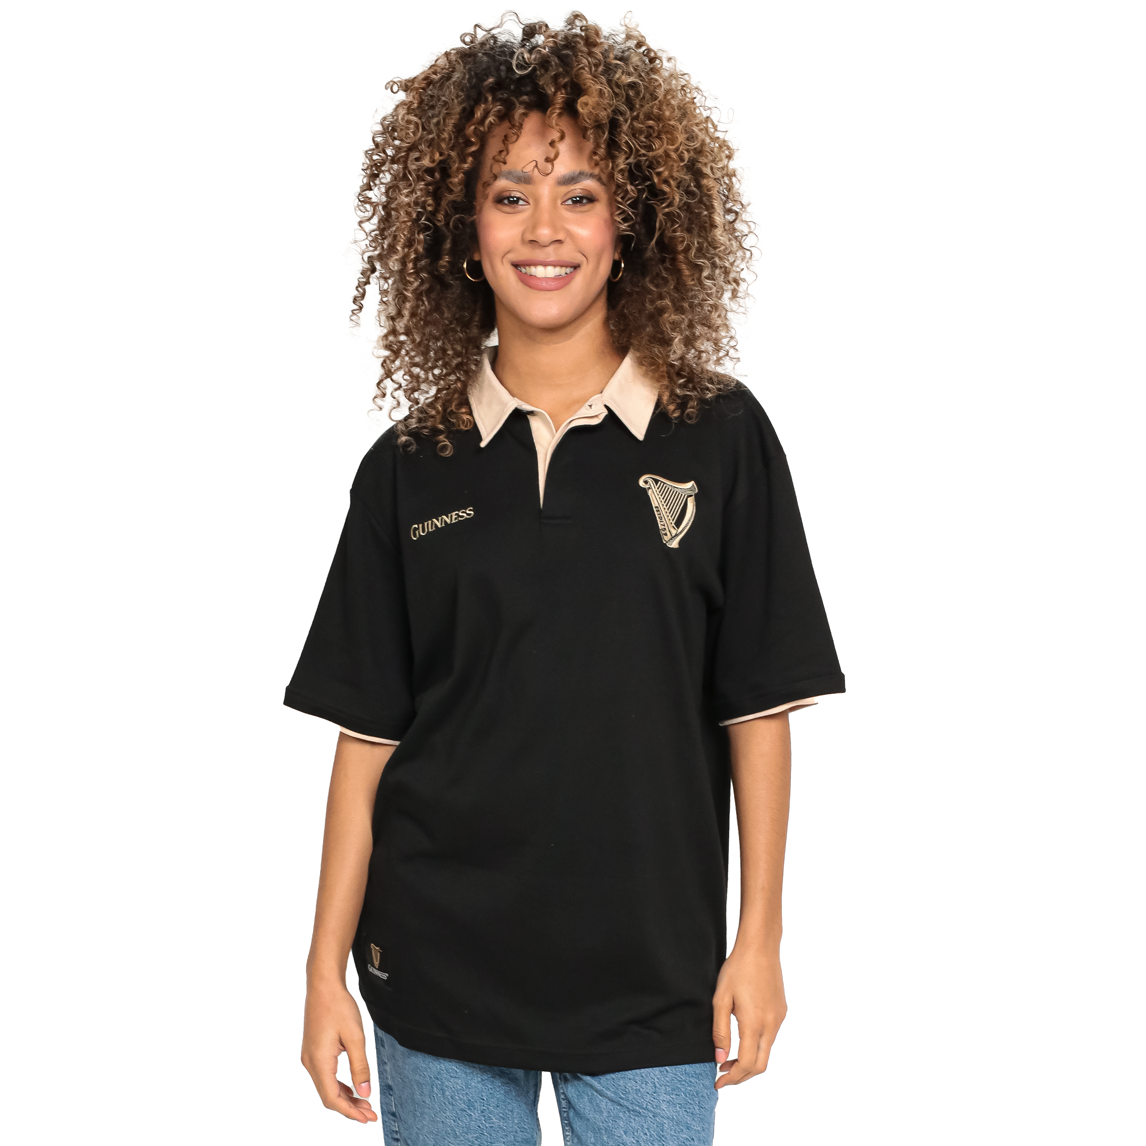 A woman wearing a Guinness Black and White Traditional Short Sleeve Rugby polo shirt.